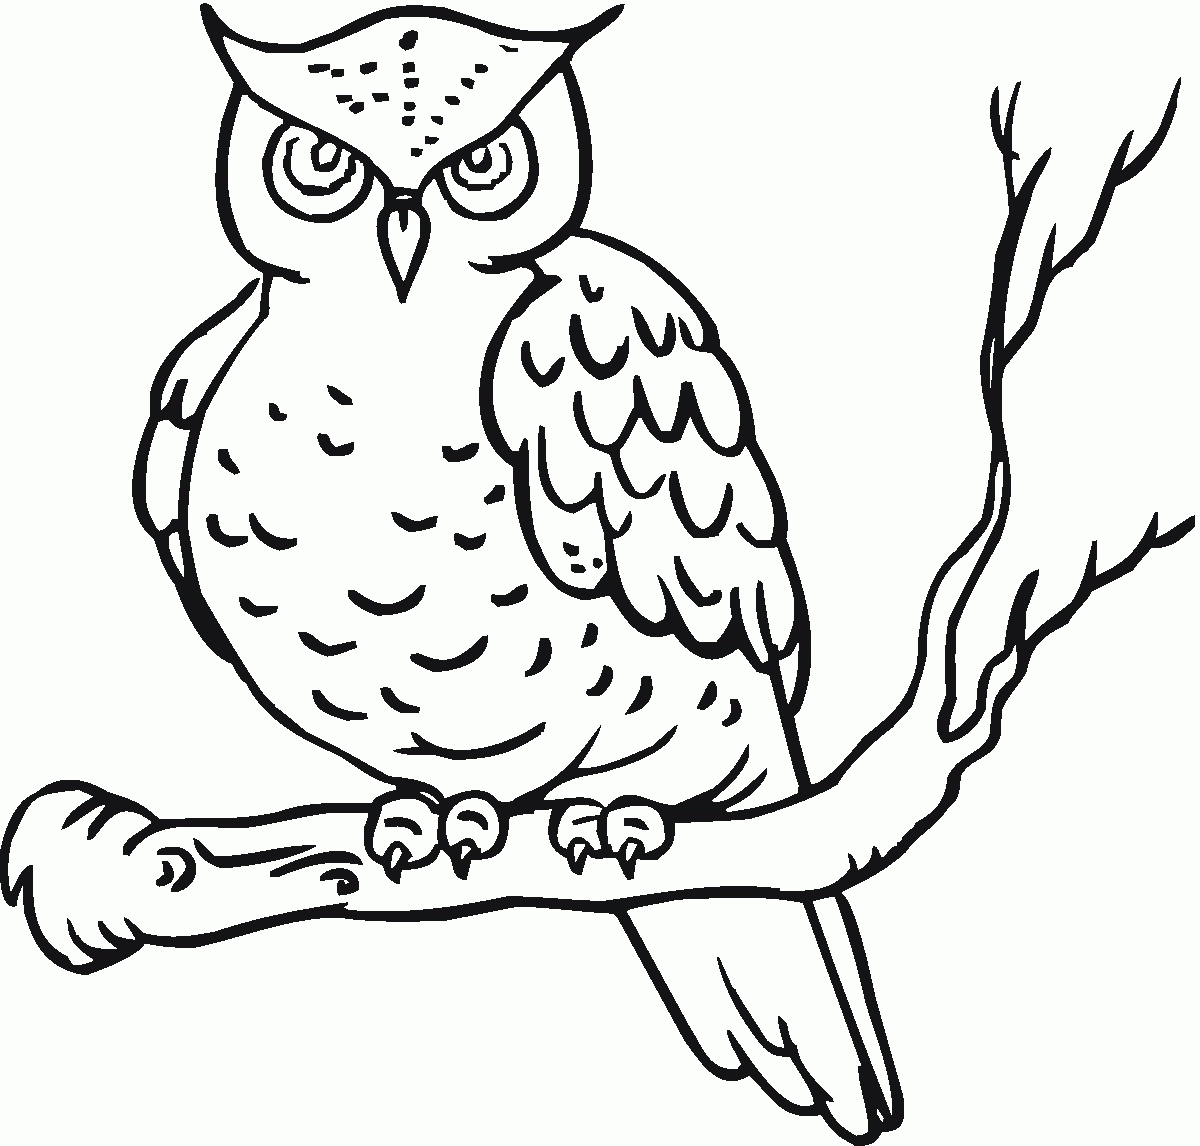 Coloring Pages Of Baby Owls - High Quality Coloring Pages